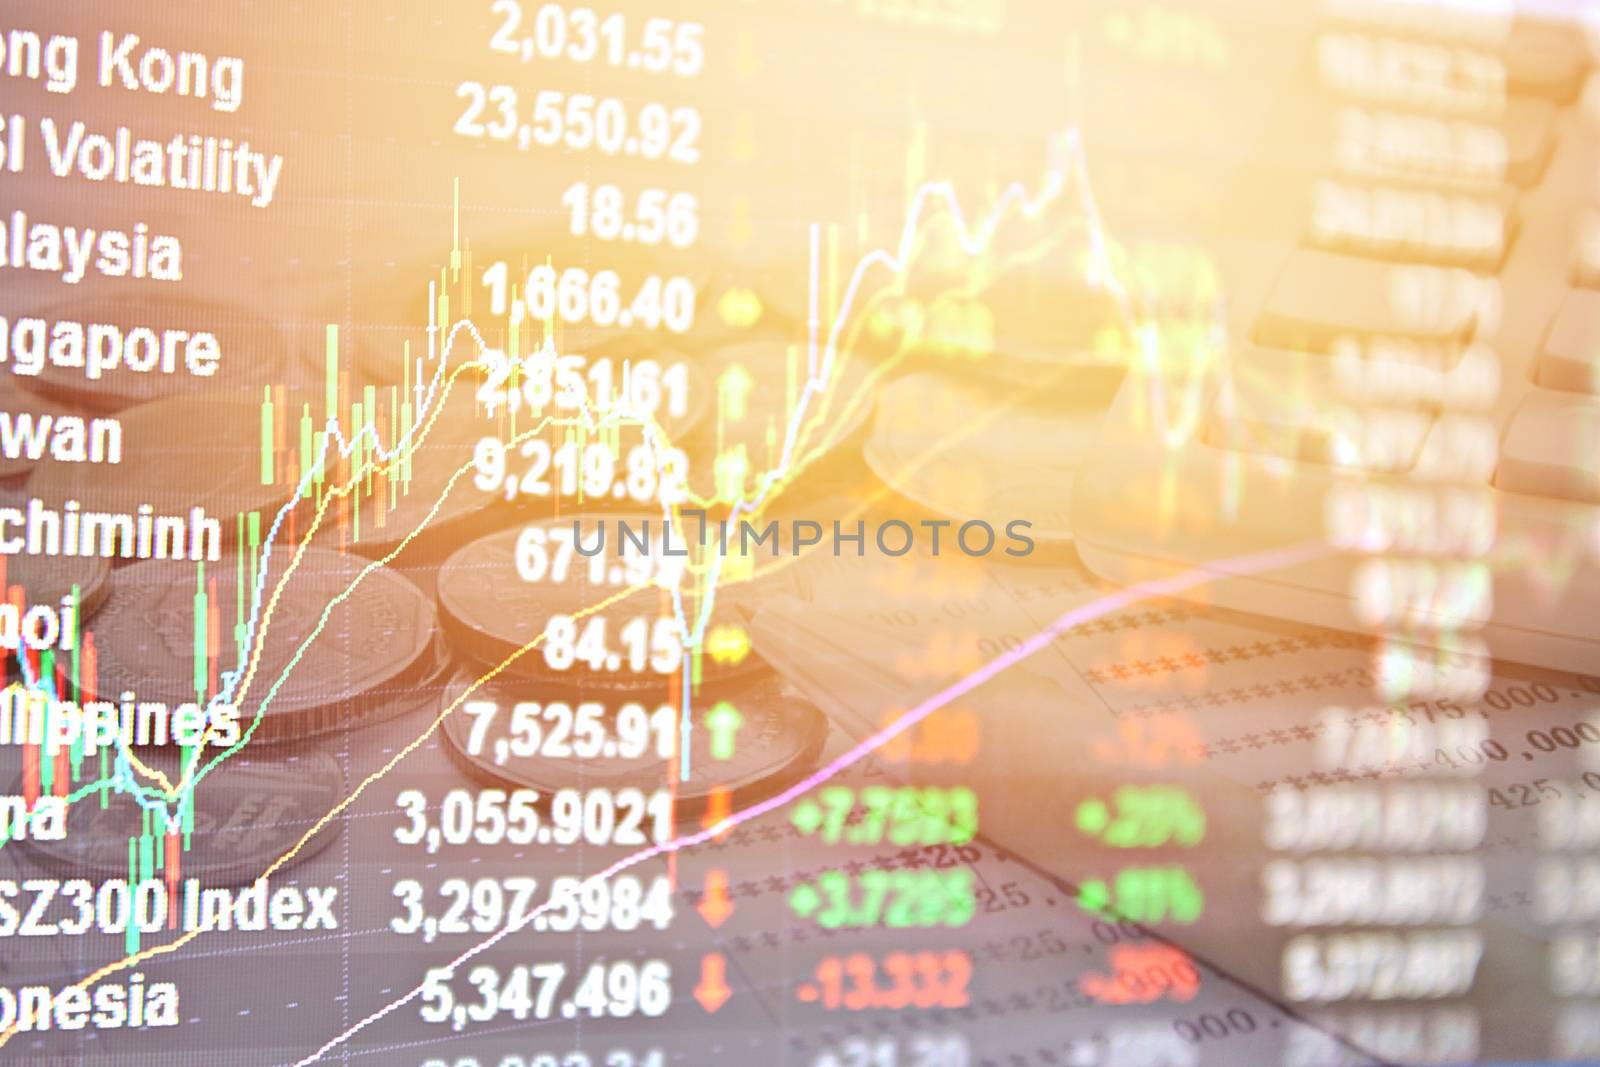 Business, finance, saving or investment background concept : Double exposure of Asia Pacific stock market index, stock exchange graph chart and coins, pen, calculator, saving account passbook